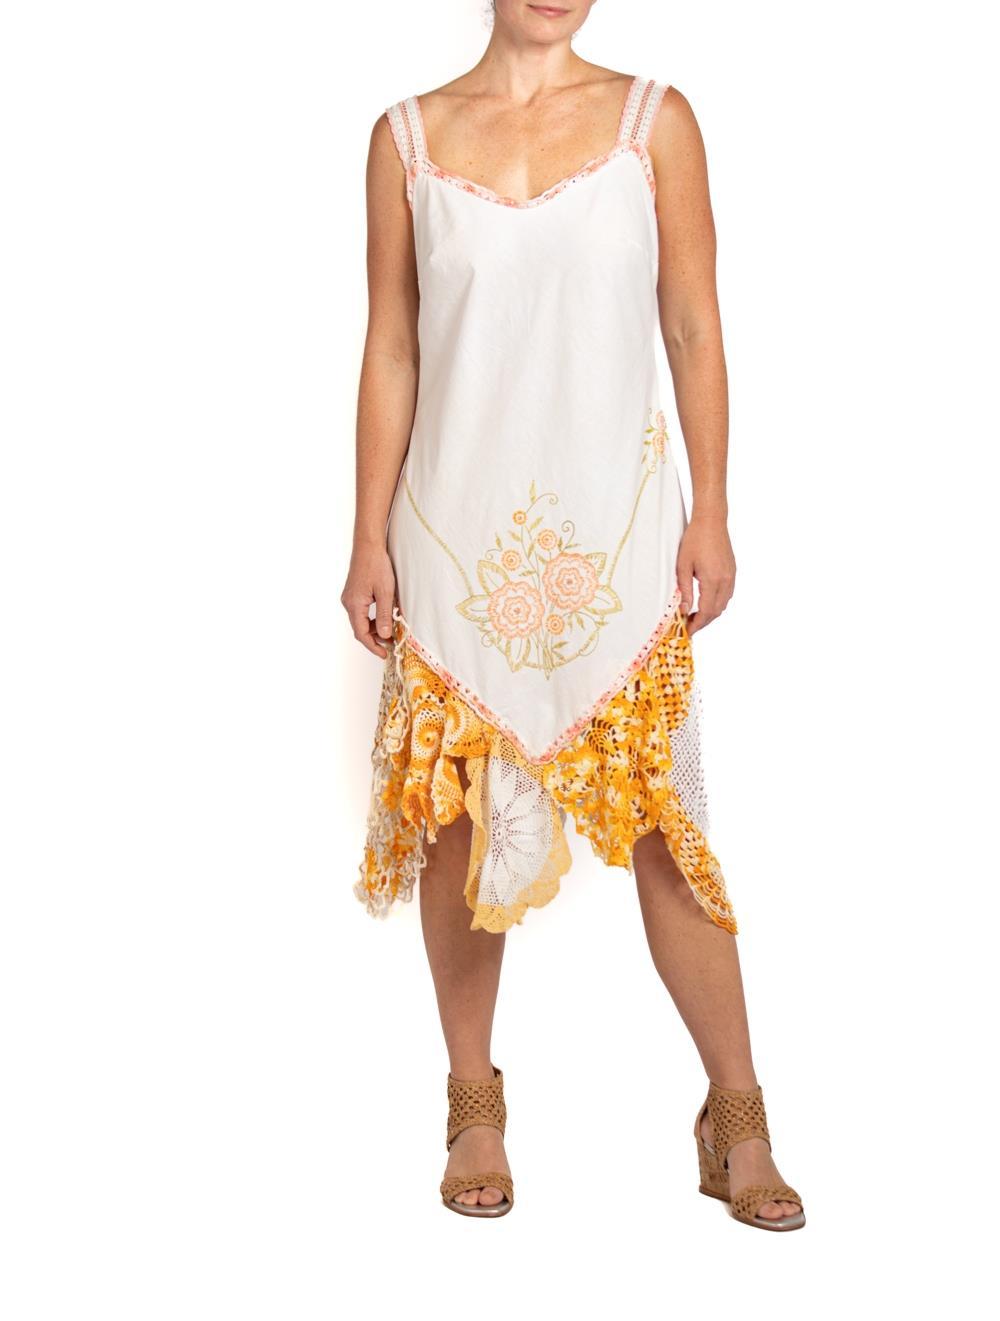 MORPHEW COLLECTION White  & Orange Cotton Blend With Handmade Crochet Dress For Sale 3